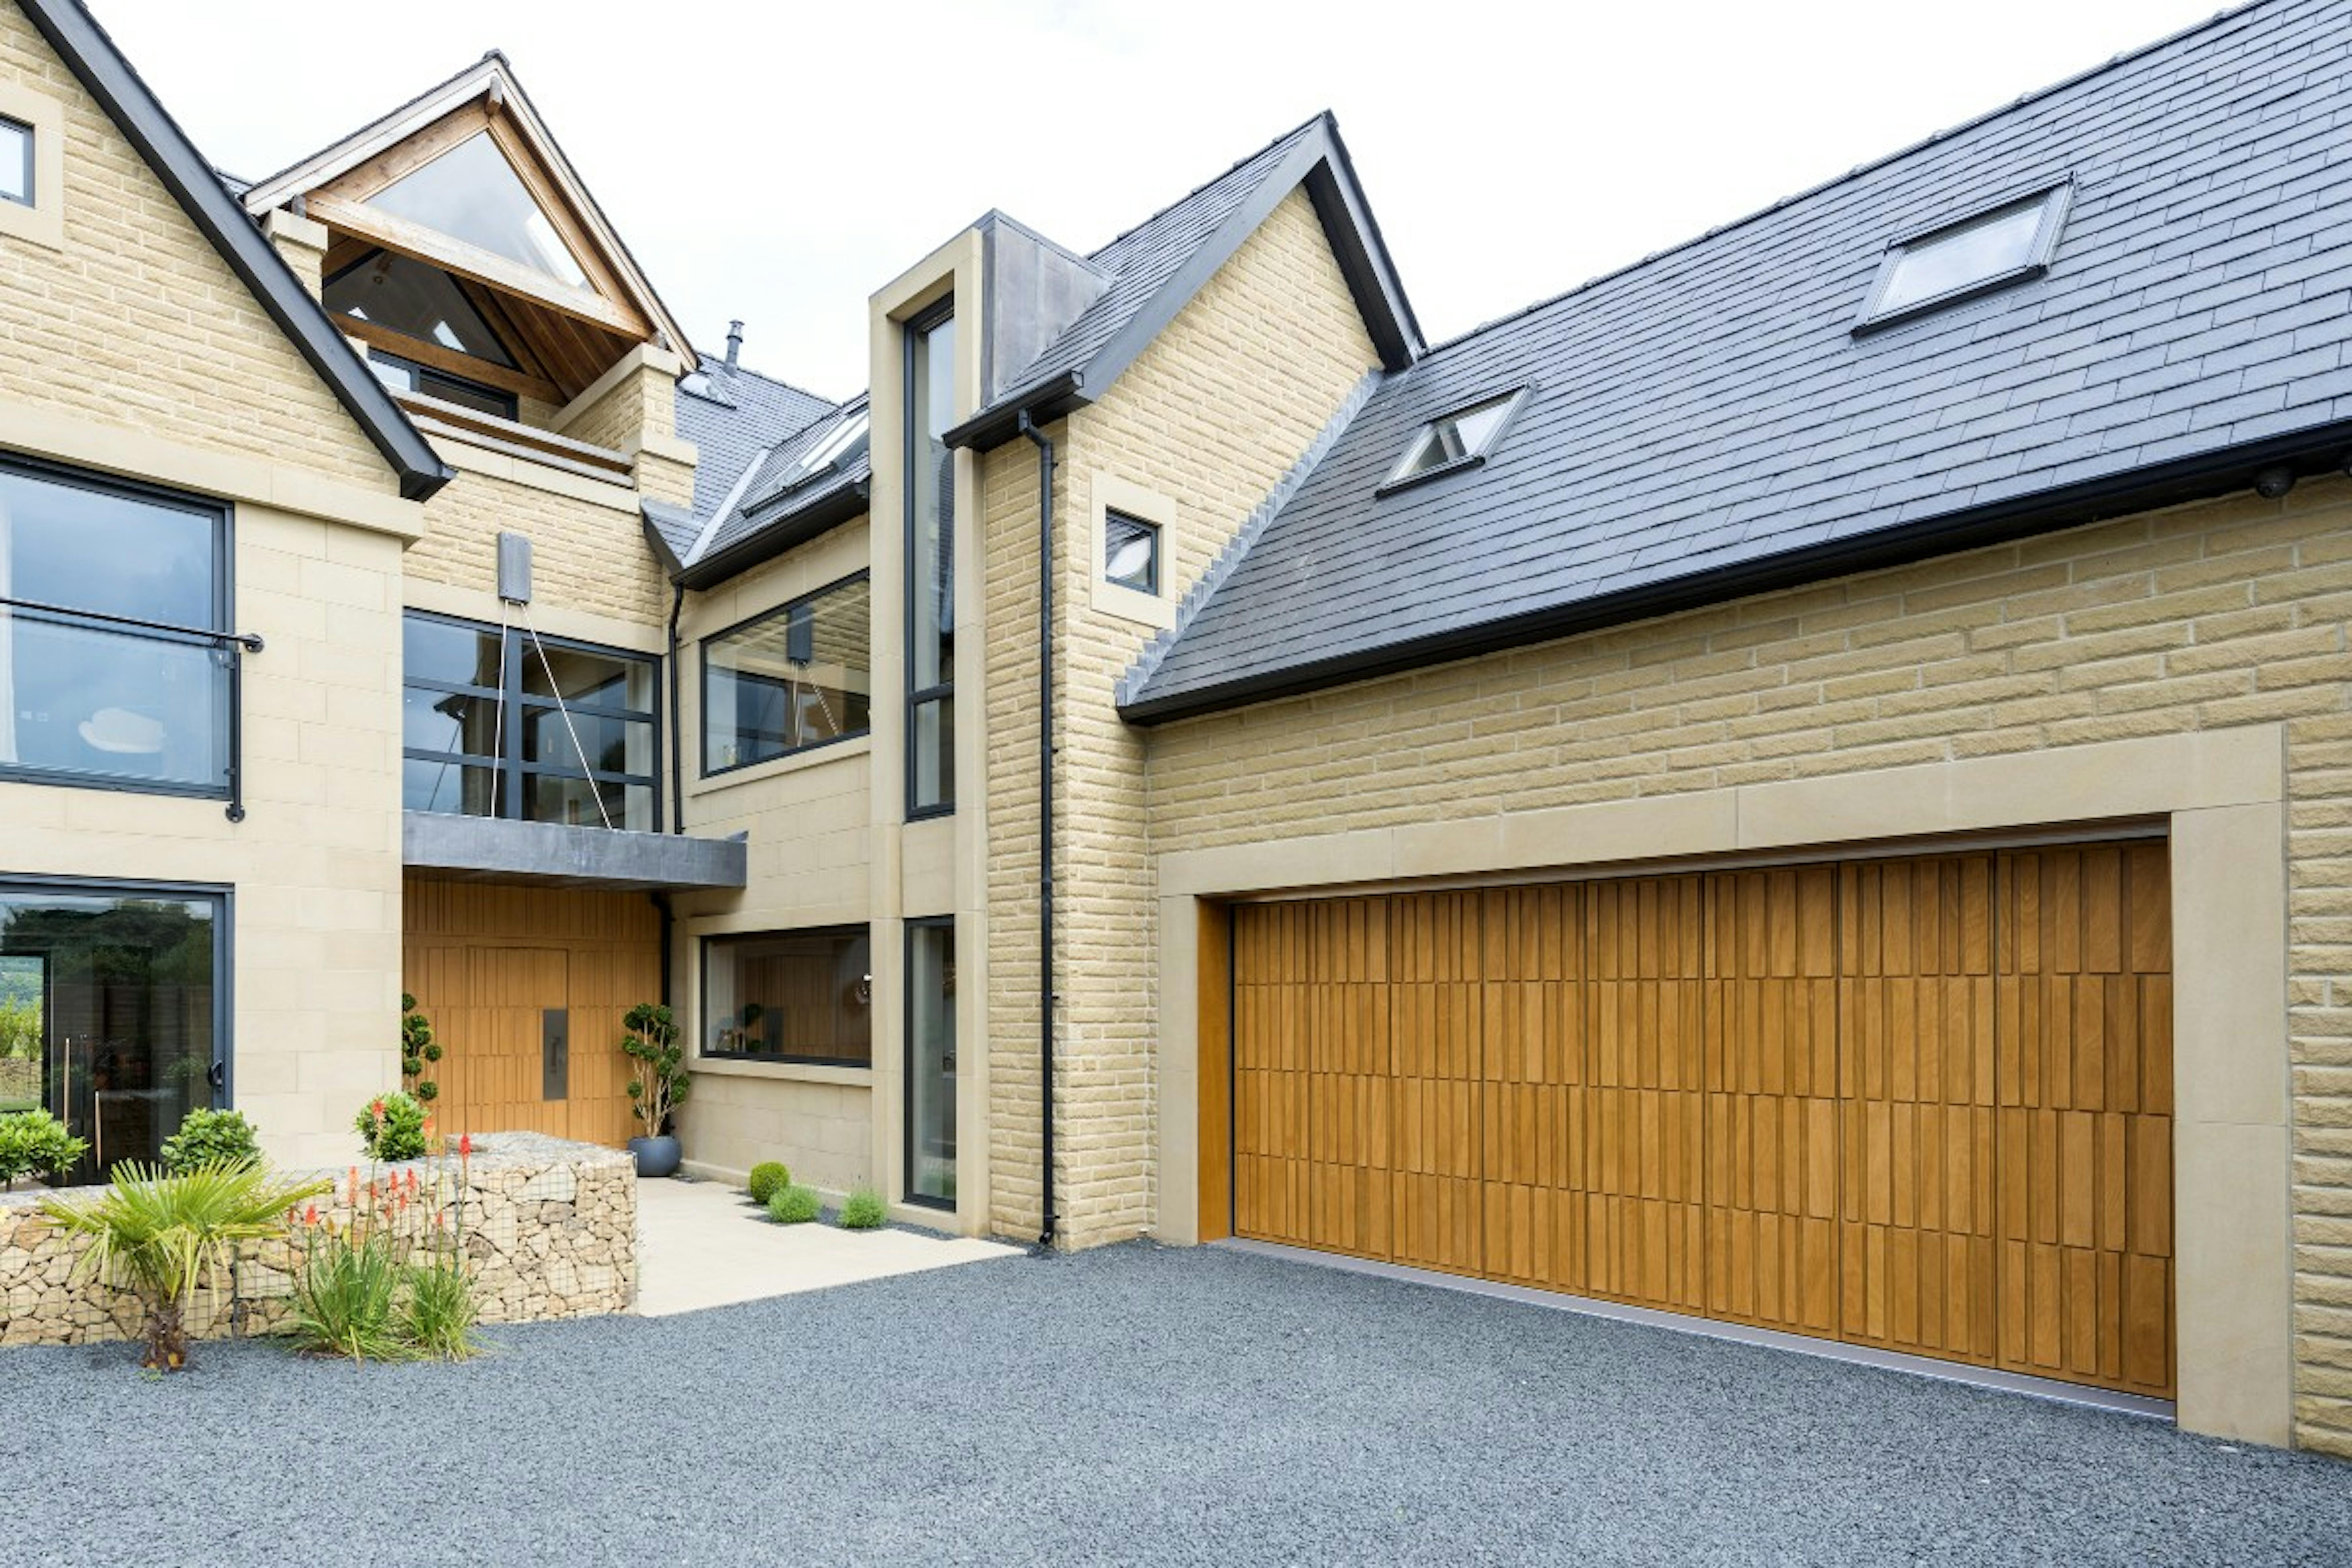 Self-build home exterior with matching contemporary front and garage doors by Deuren - style is Tavole in honey oak finish. 